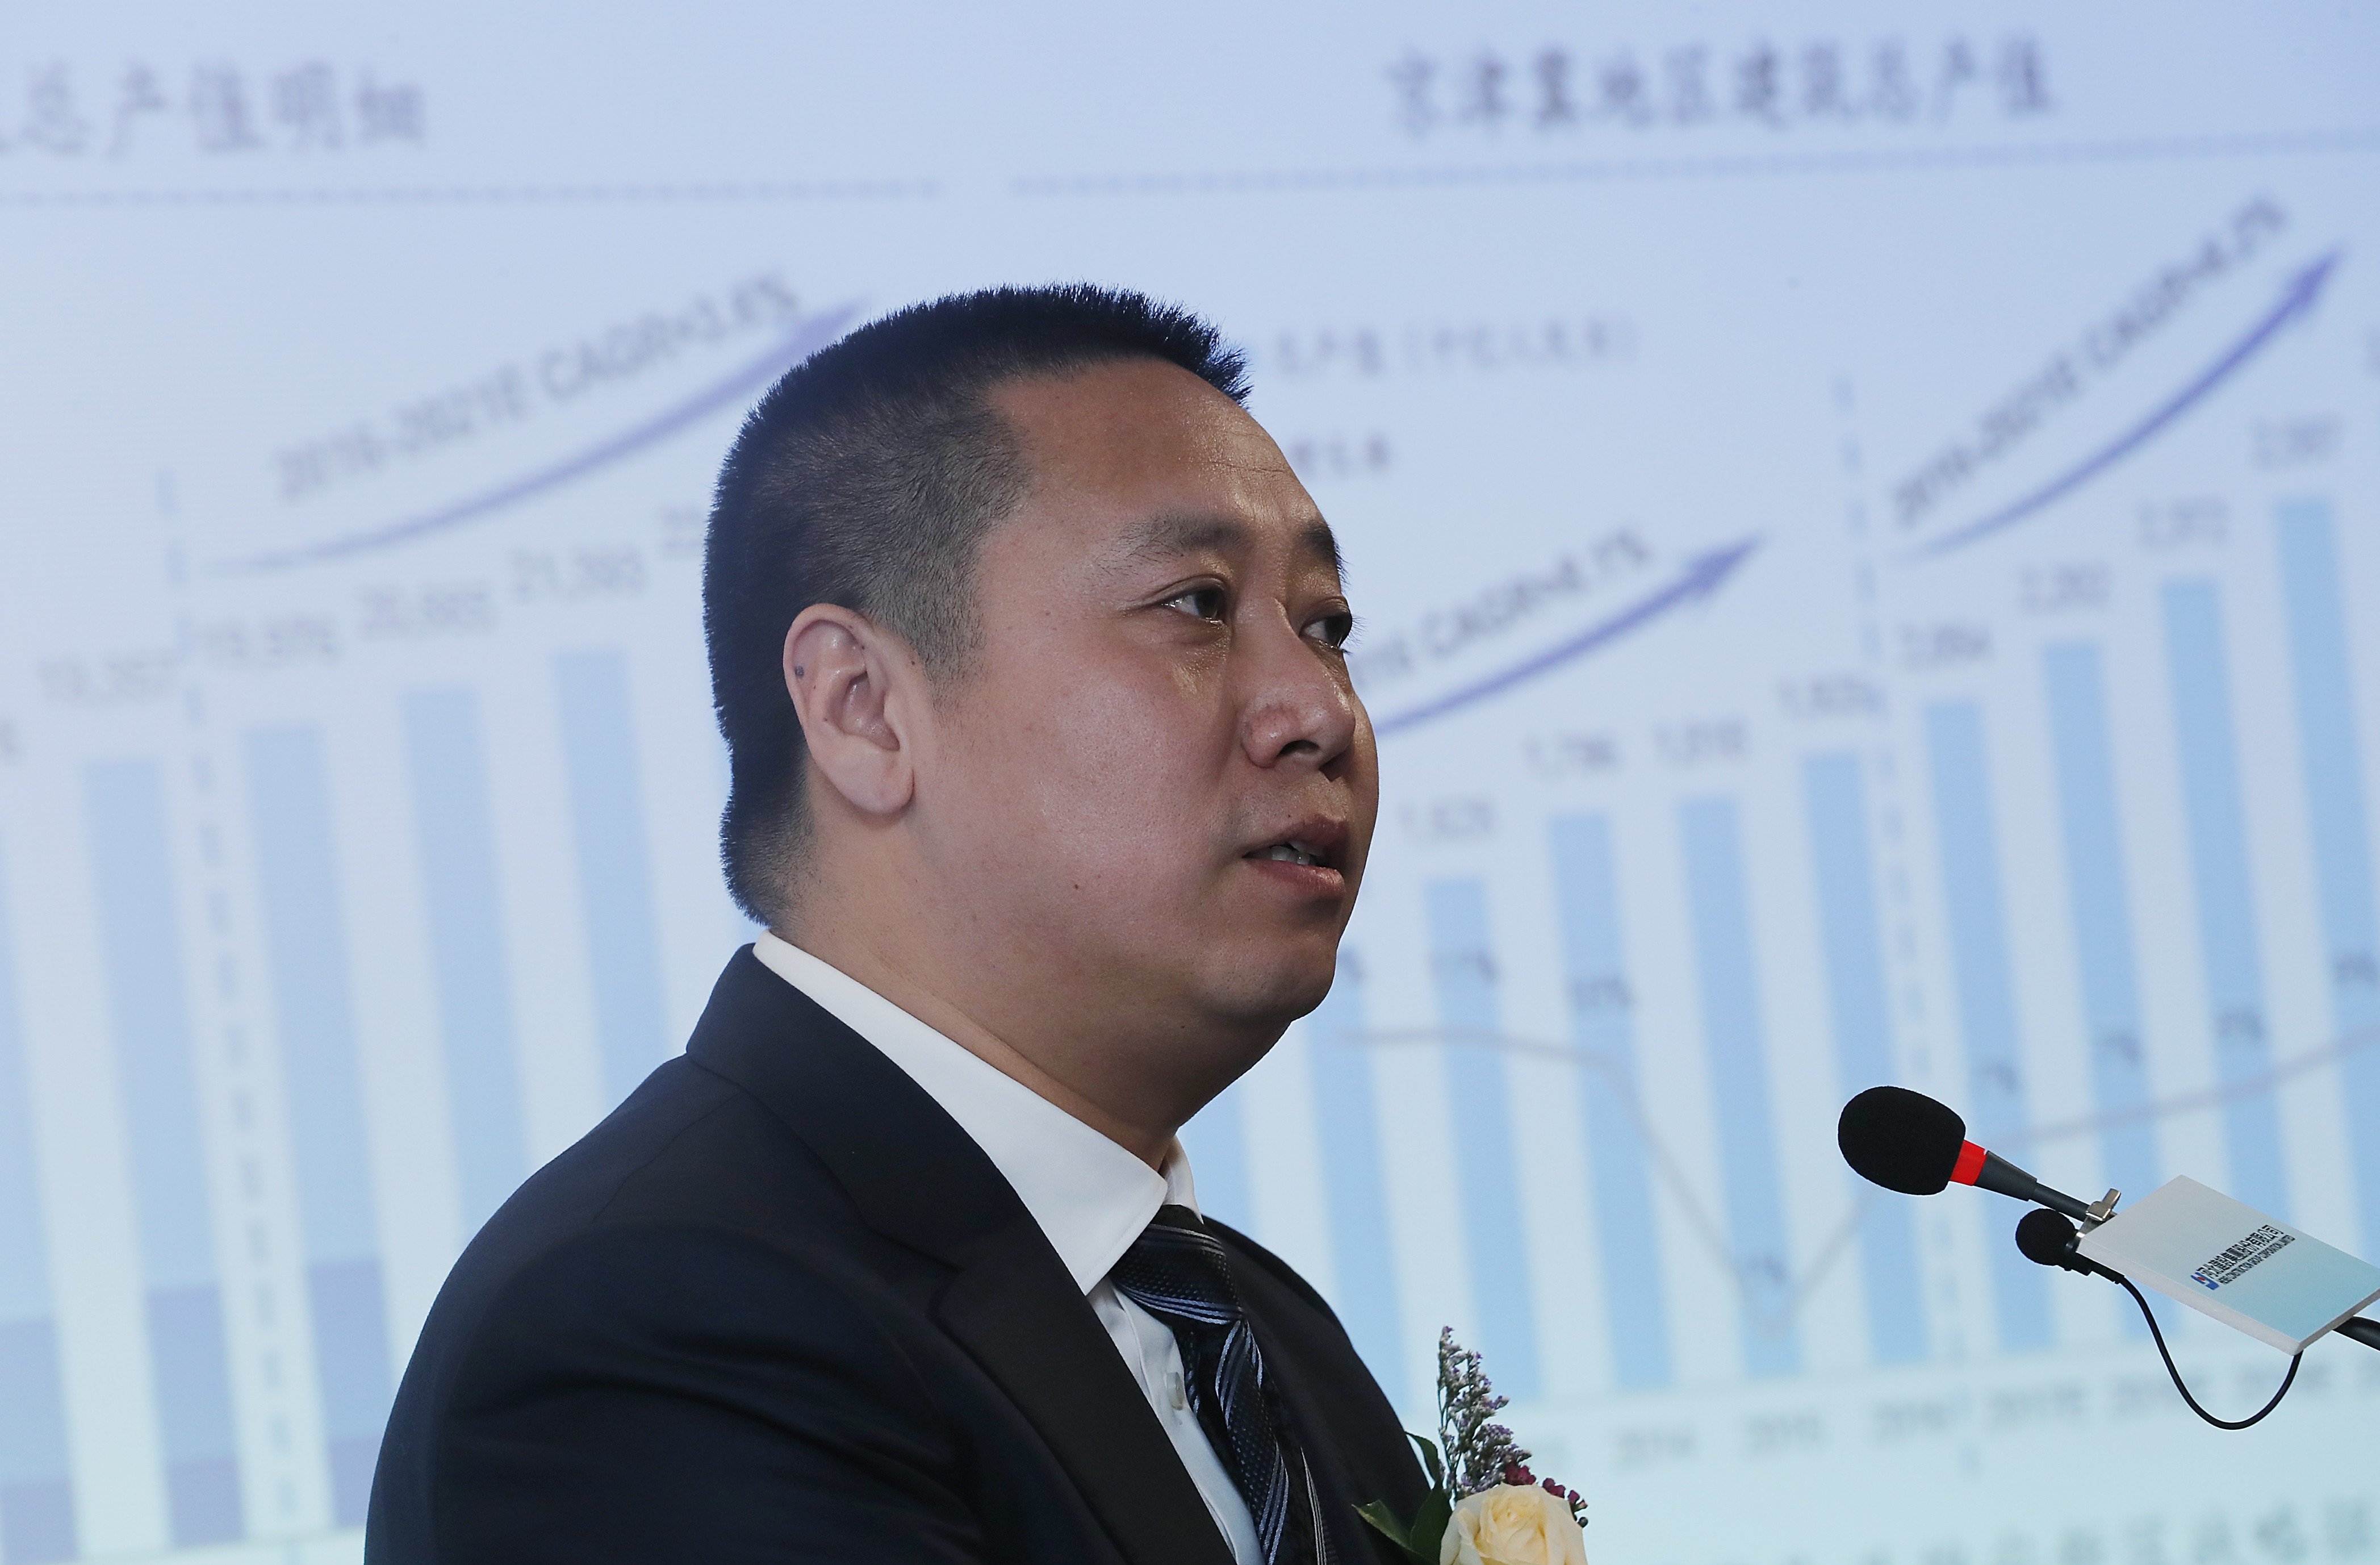 Shang Jinfeng, president and executive director of Hebei Construction, addresses a press conference on the company’s forthcoming IPO in Hong Kong. Photo: Edward Wong